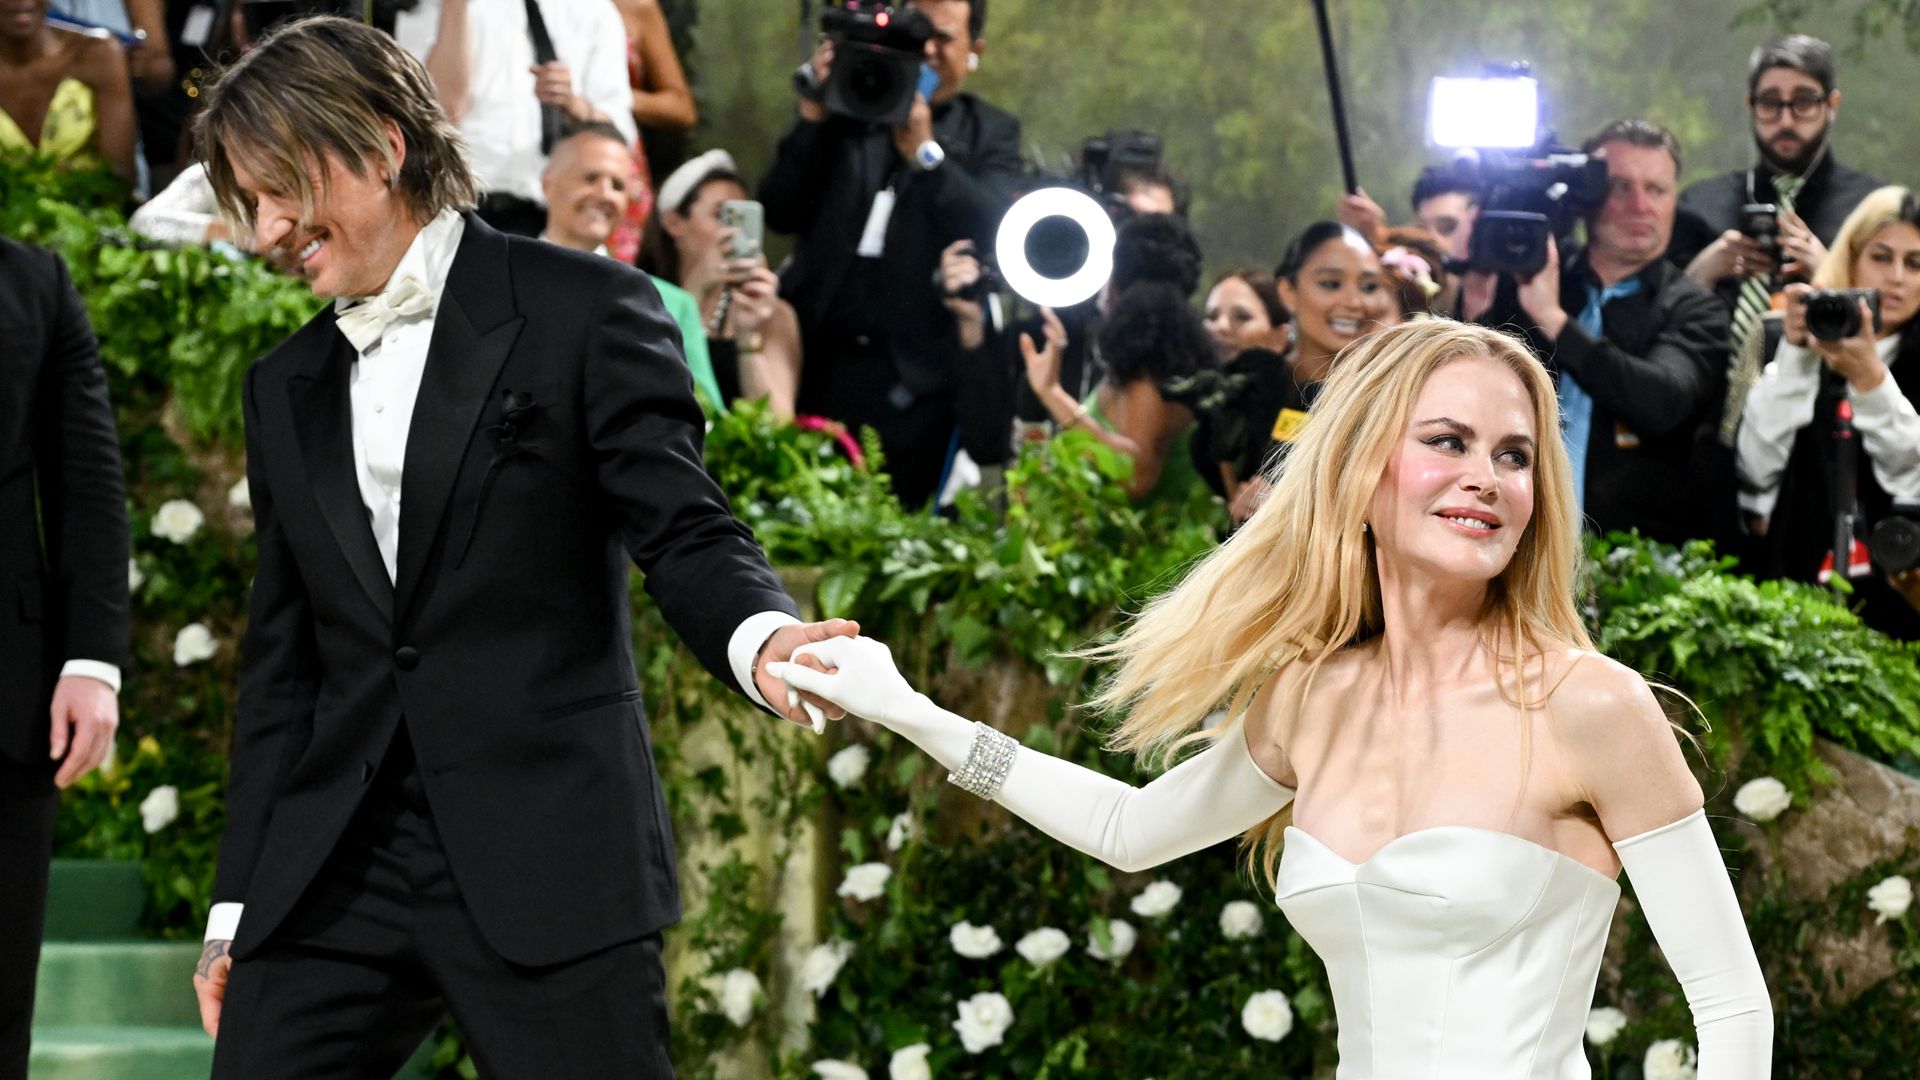 Nicole Kidman and Keith Urban's dancing at the Met Gala is couple goals